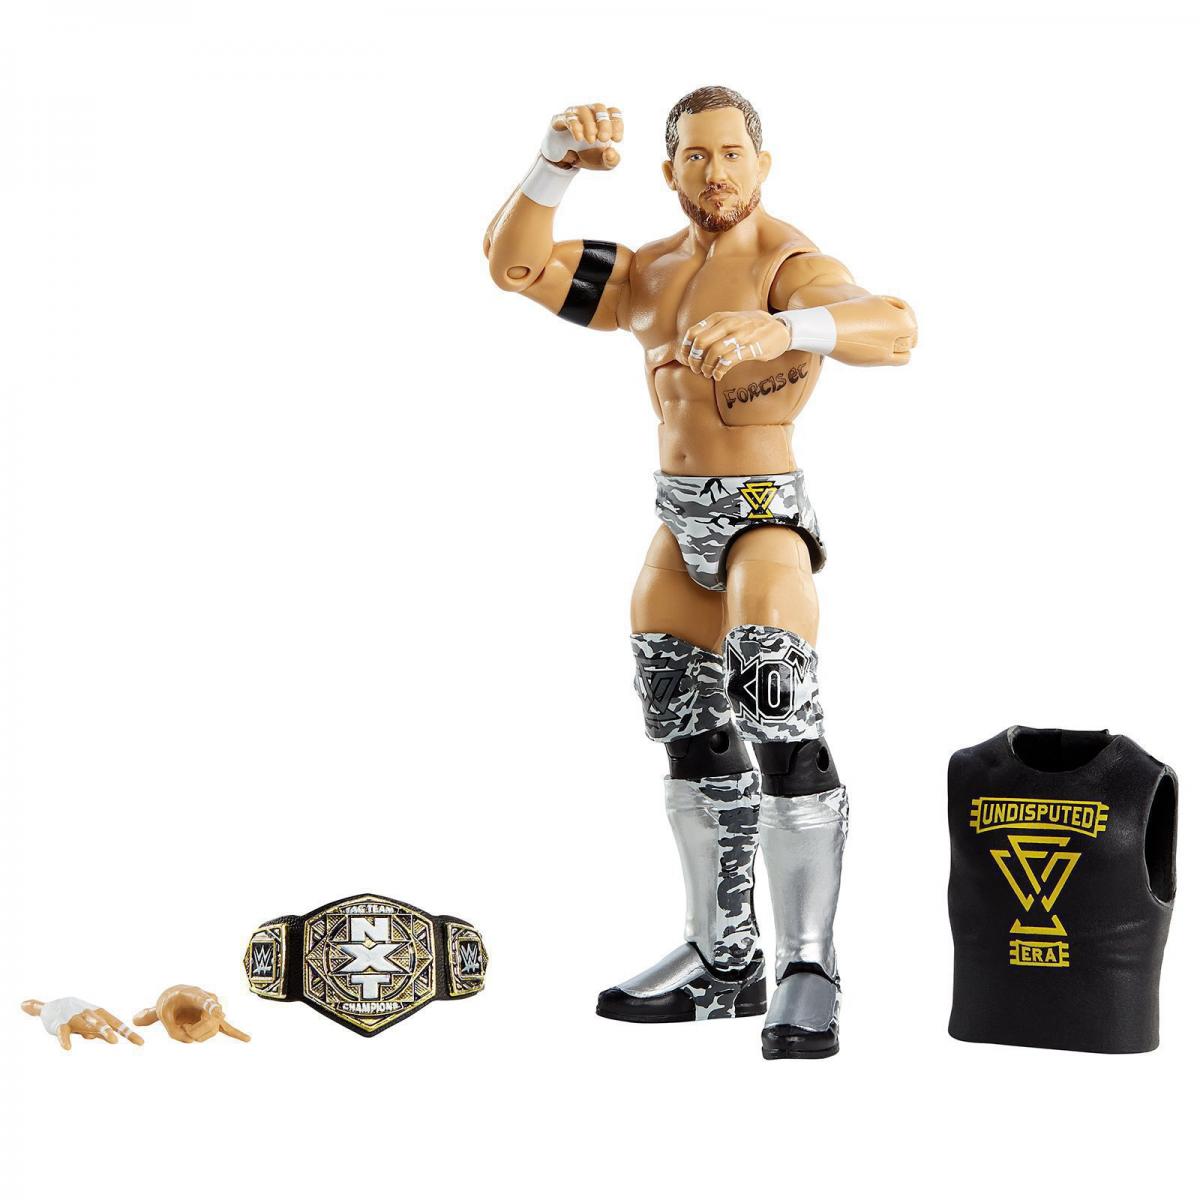 2020 WWE Mattel Elite Collection Series 80 Kyle O'Reilly